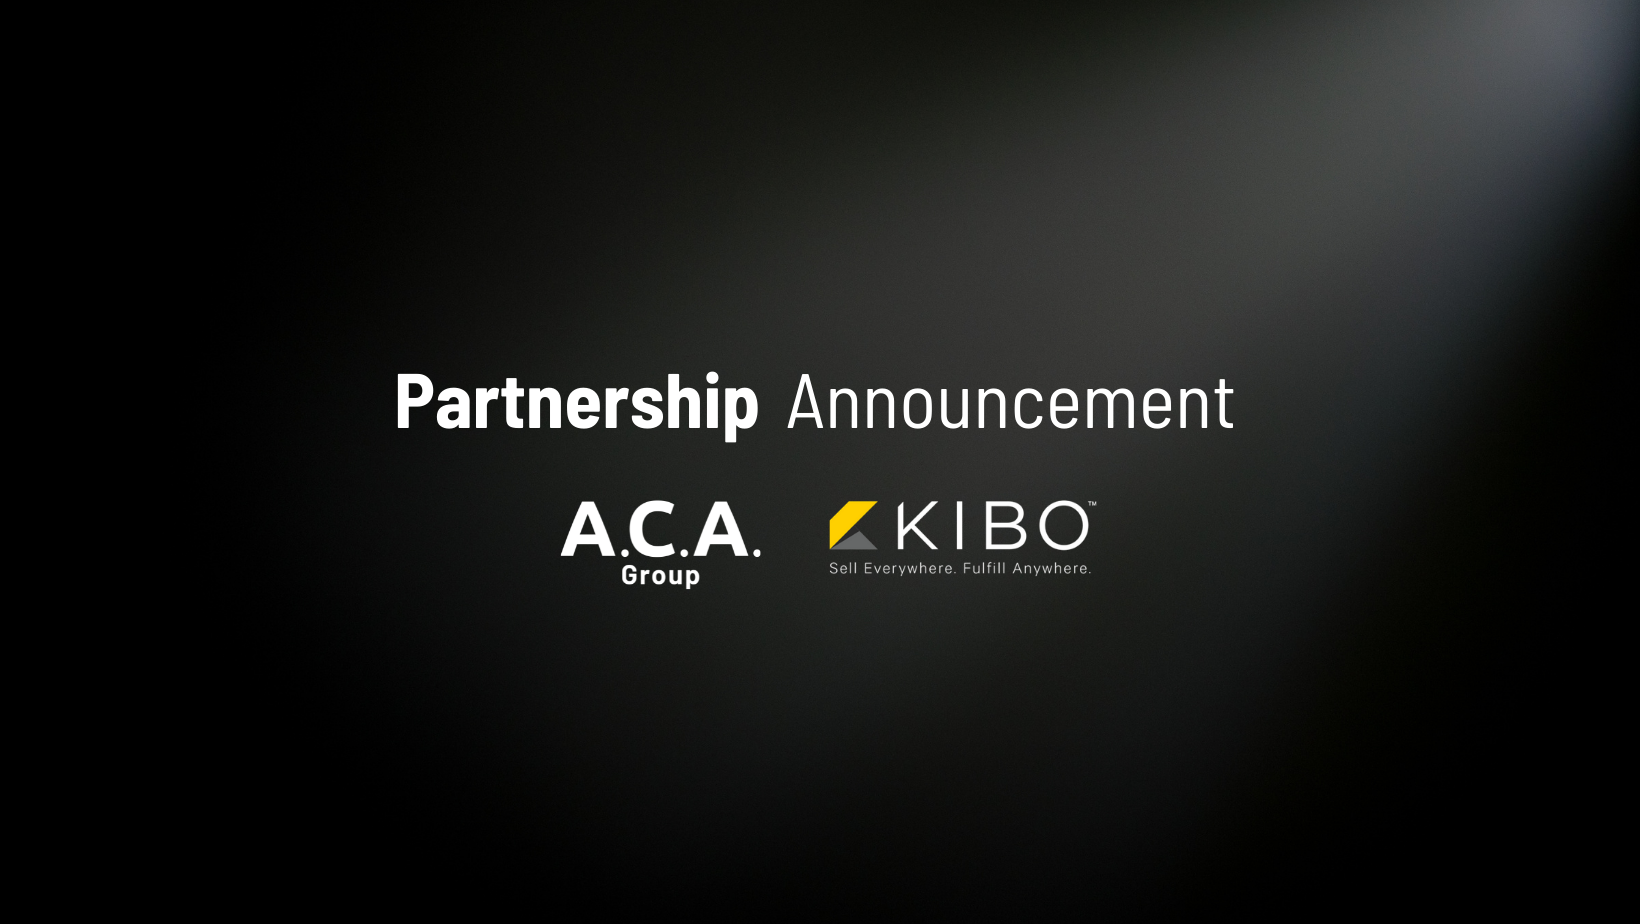 Parntership announcement Kibo and ACA Group